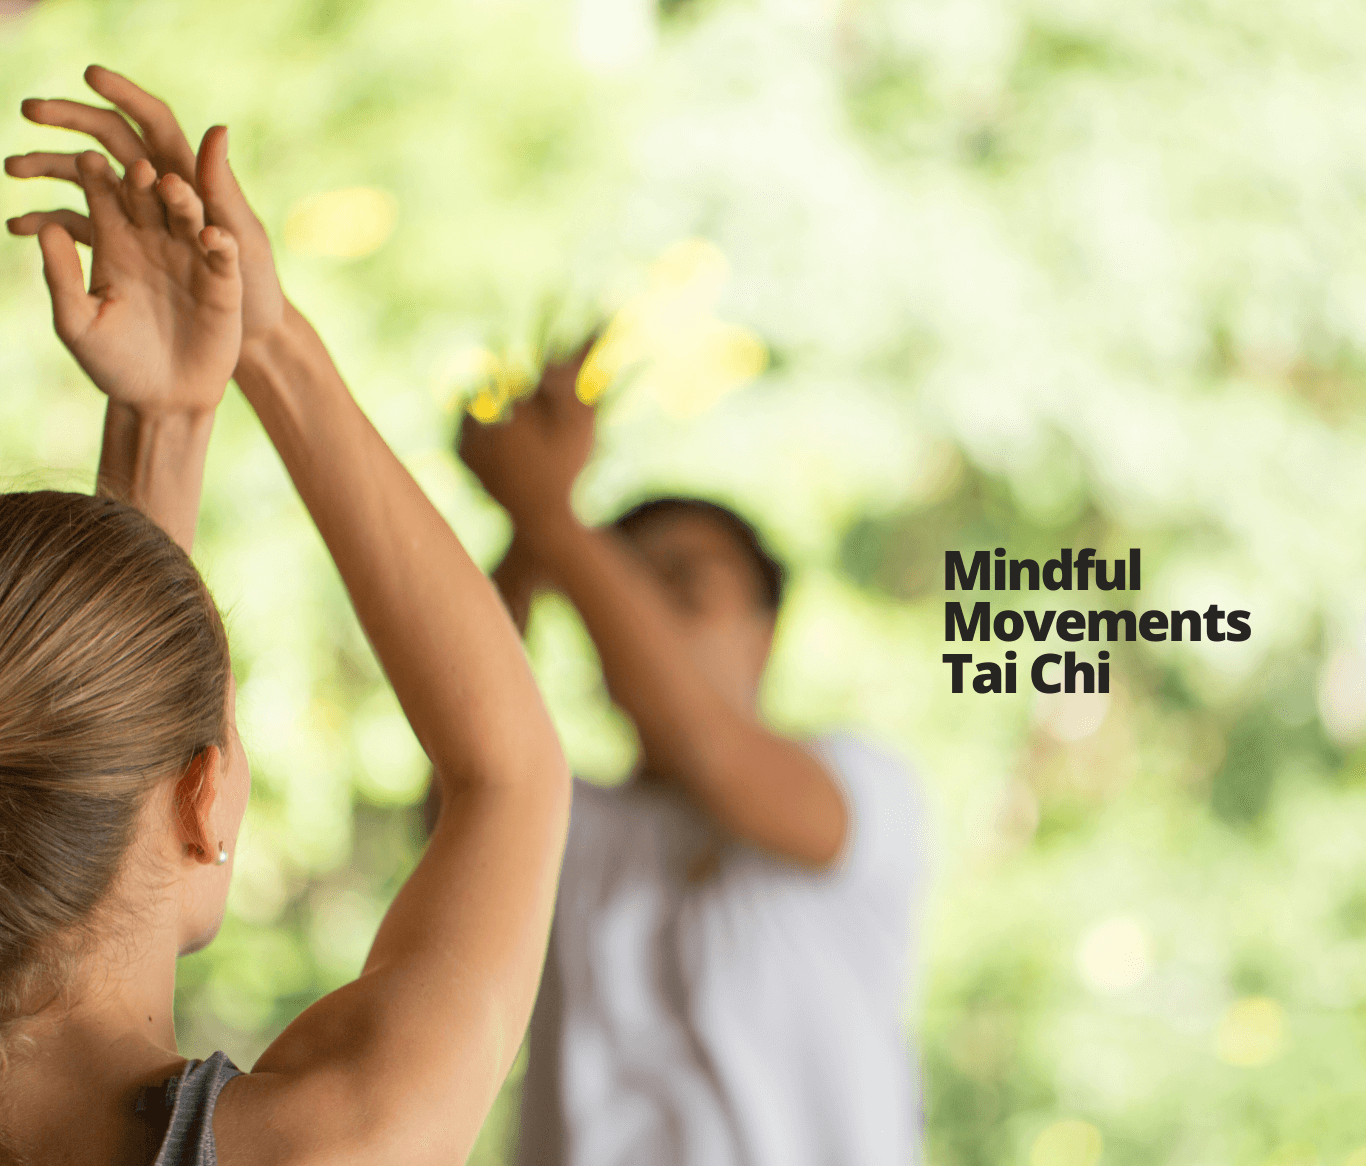 https://www.clearpathne.org/wp-content/uploads/2022/01/mindful-movements.png